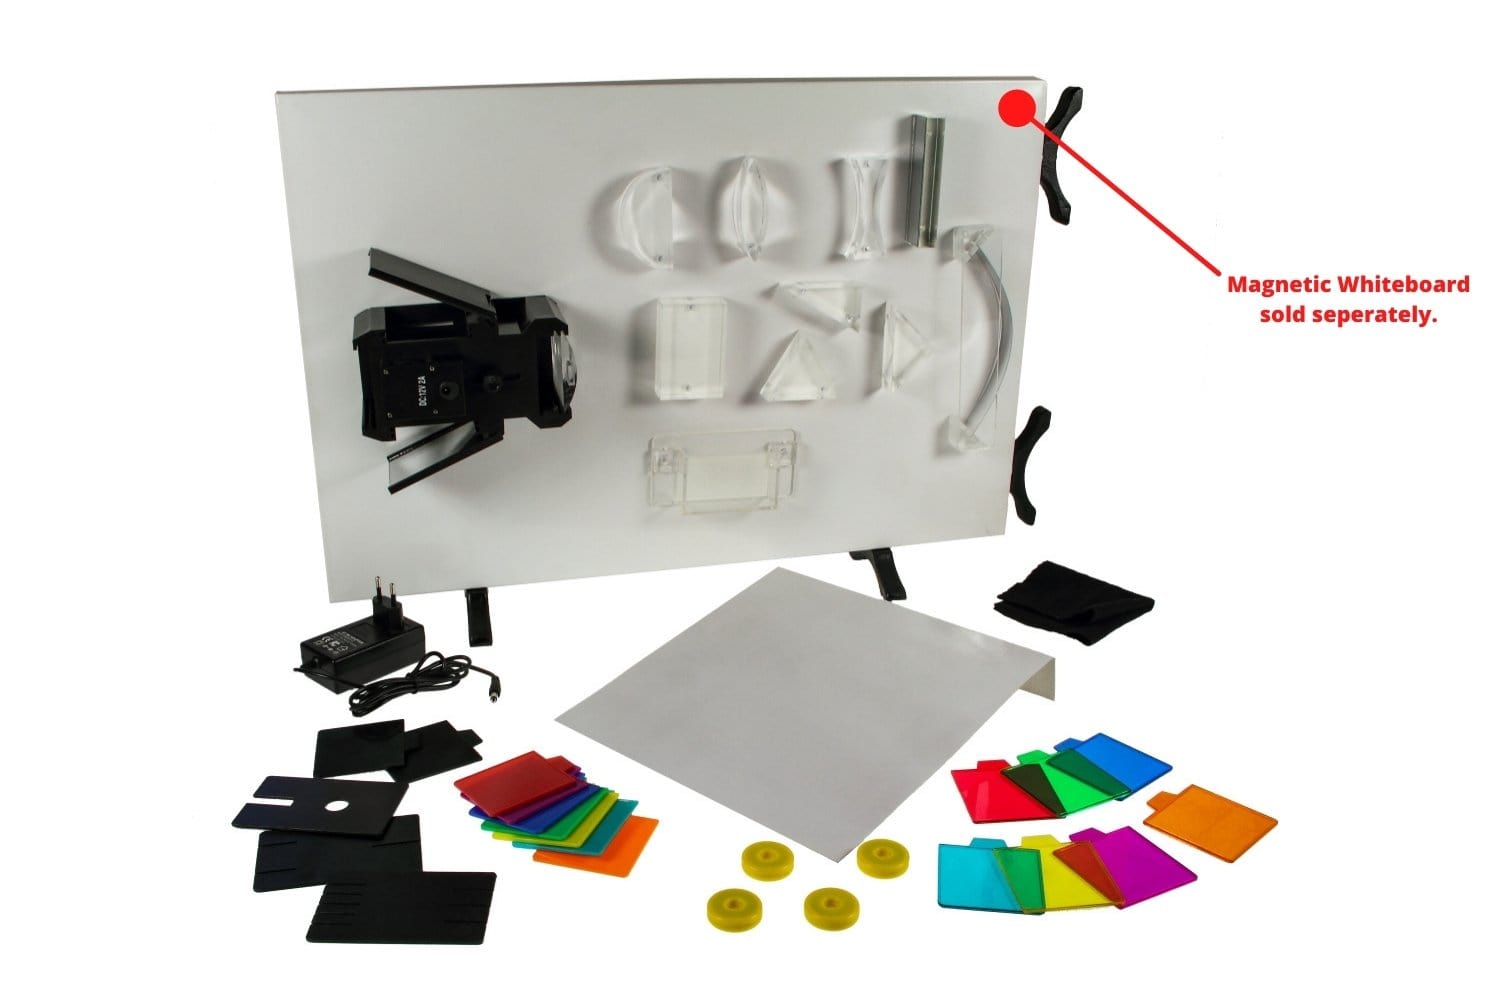 LED lightbox sign: One Magic Product to Light Up Your Business